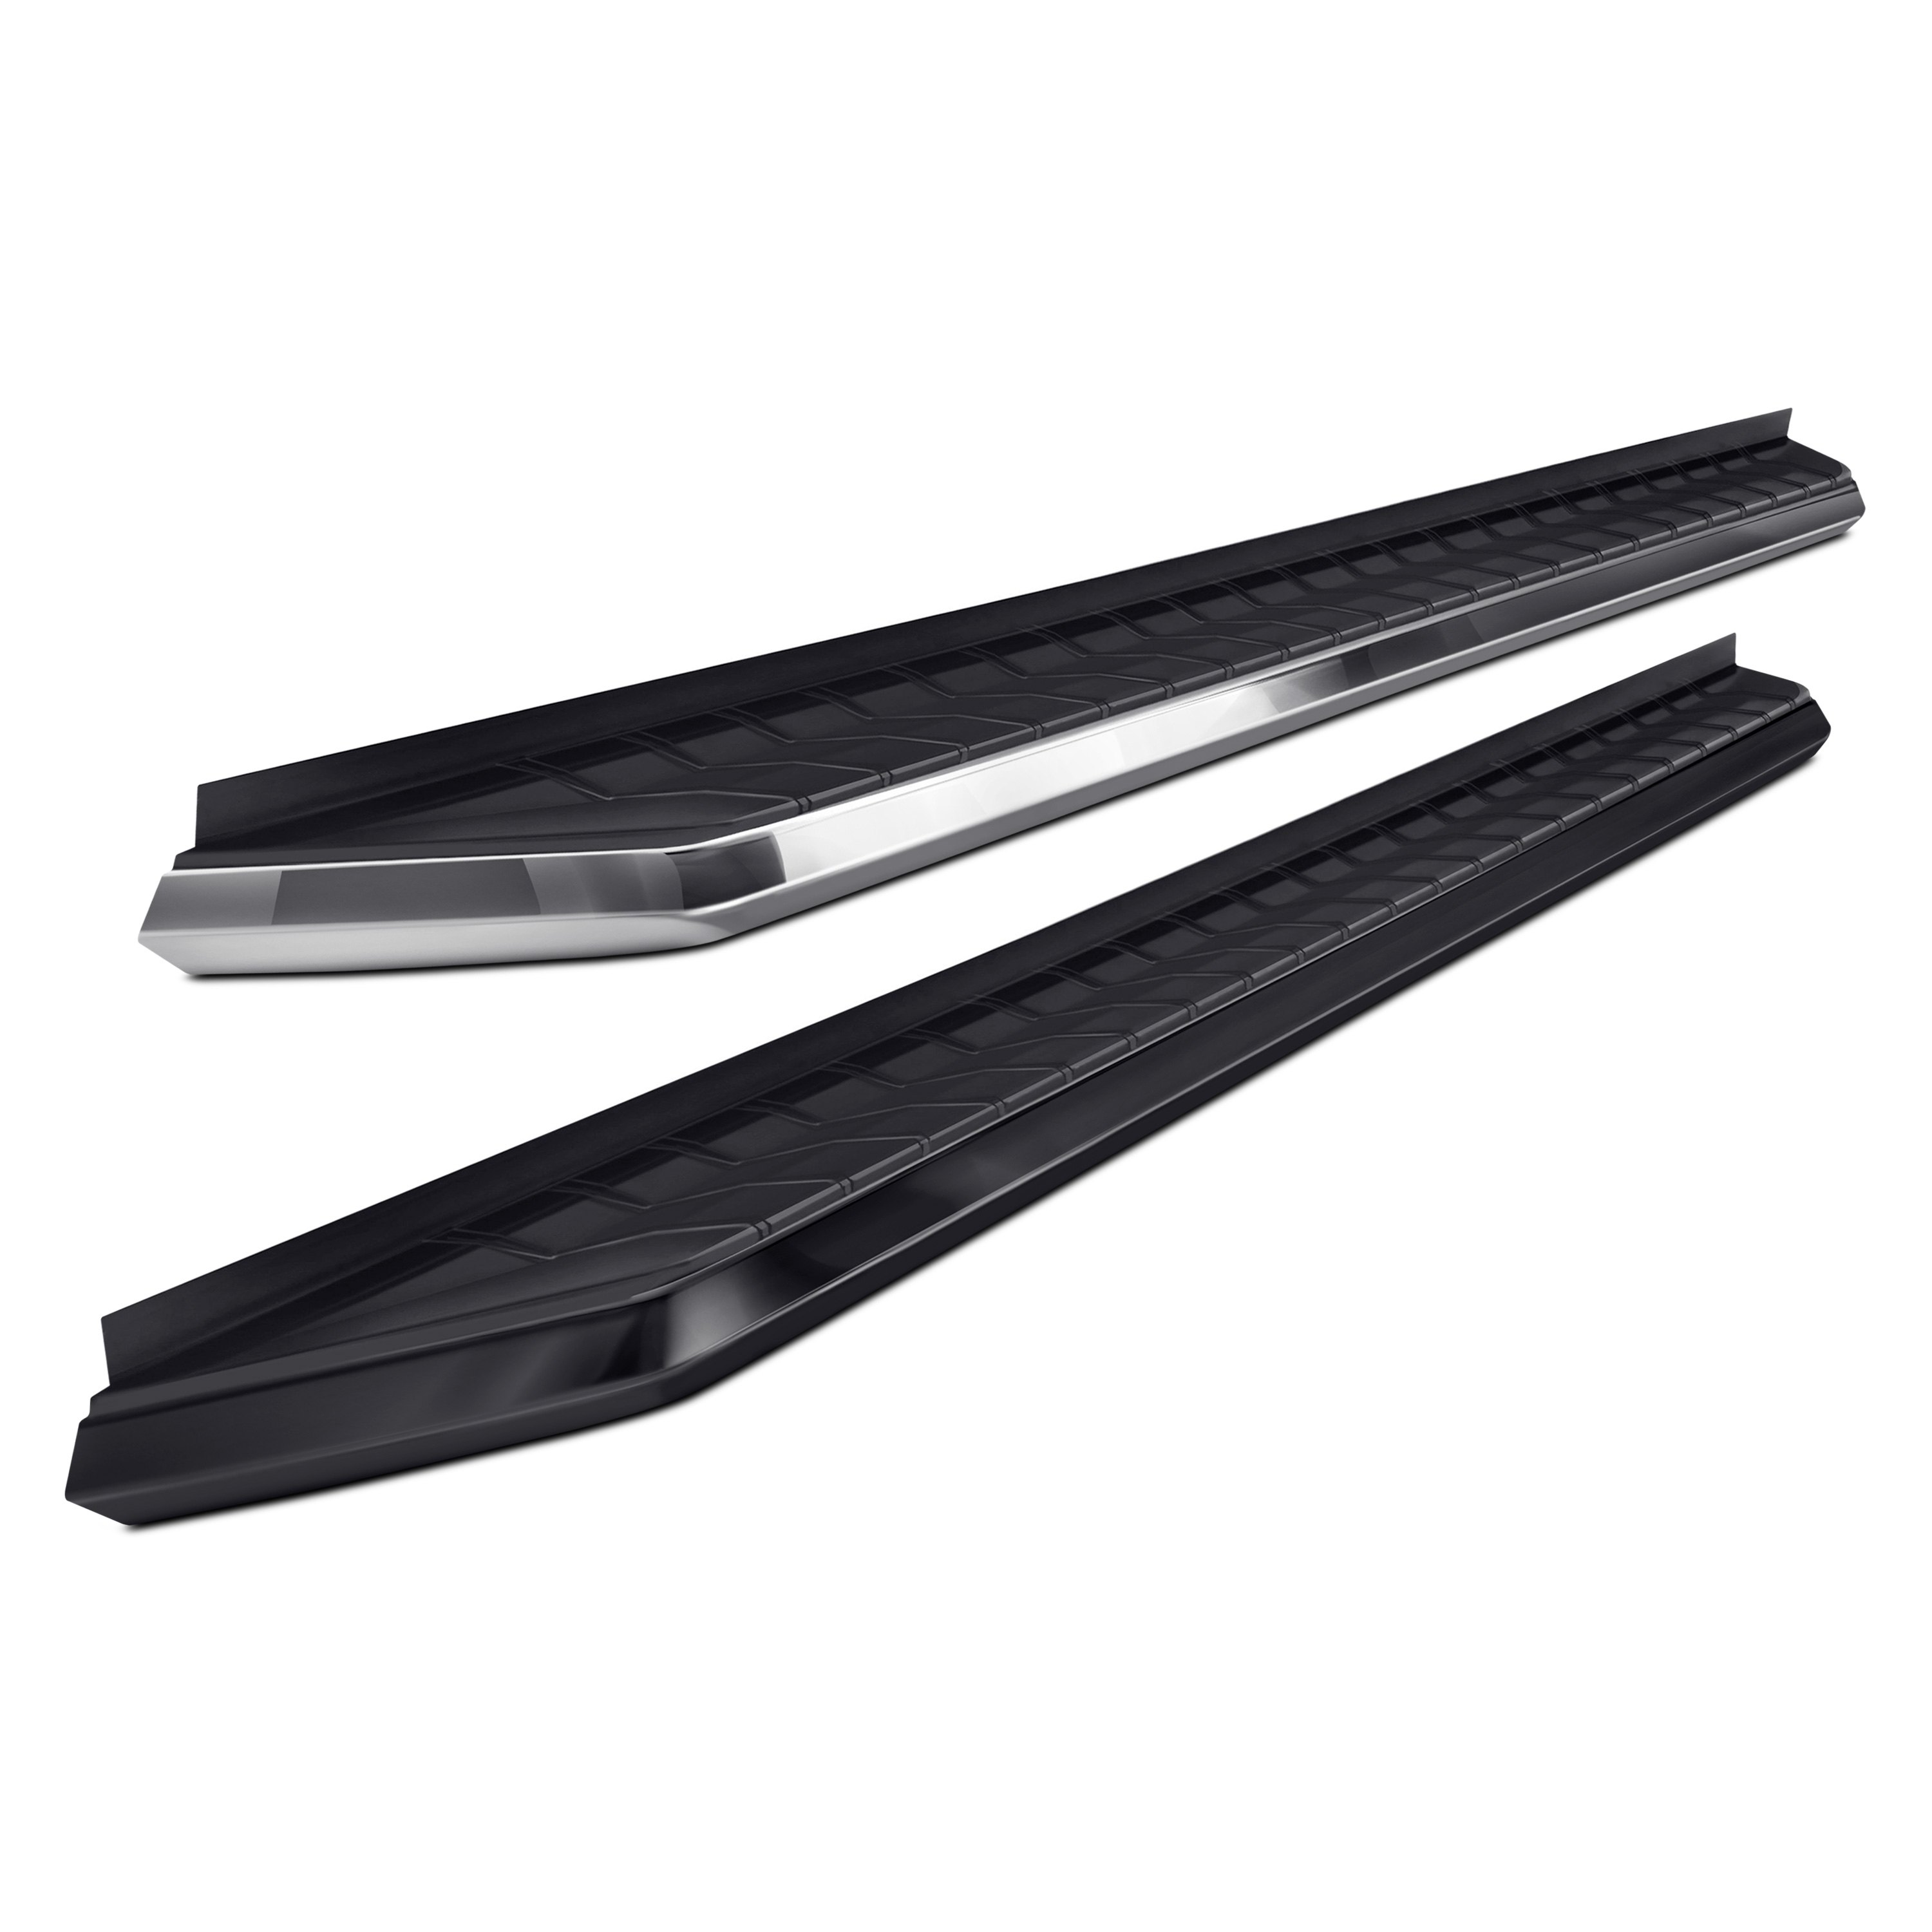 ARIES 2051038 AeroTread 73-Inch Polished Stainless Steel SUV Running Boards Select Nissan Pathfinder